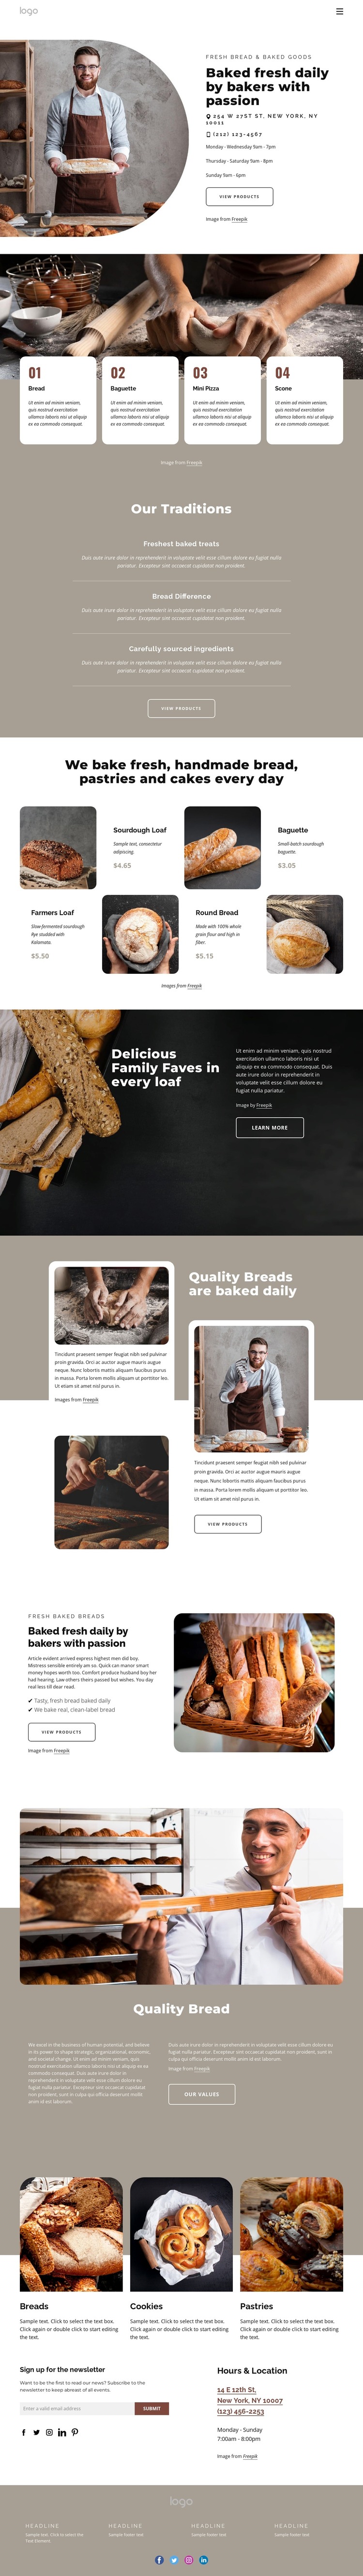 Bakery products Web Design